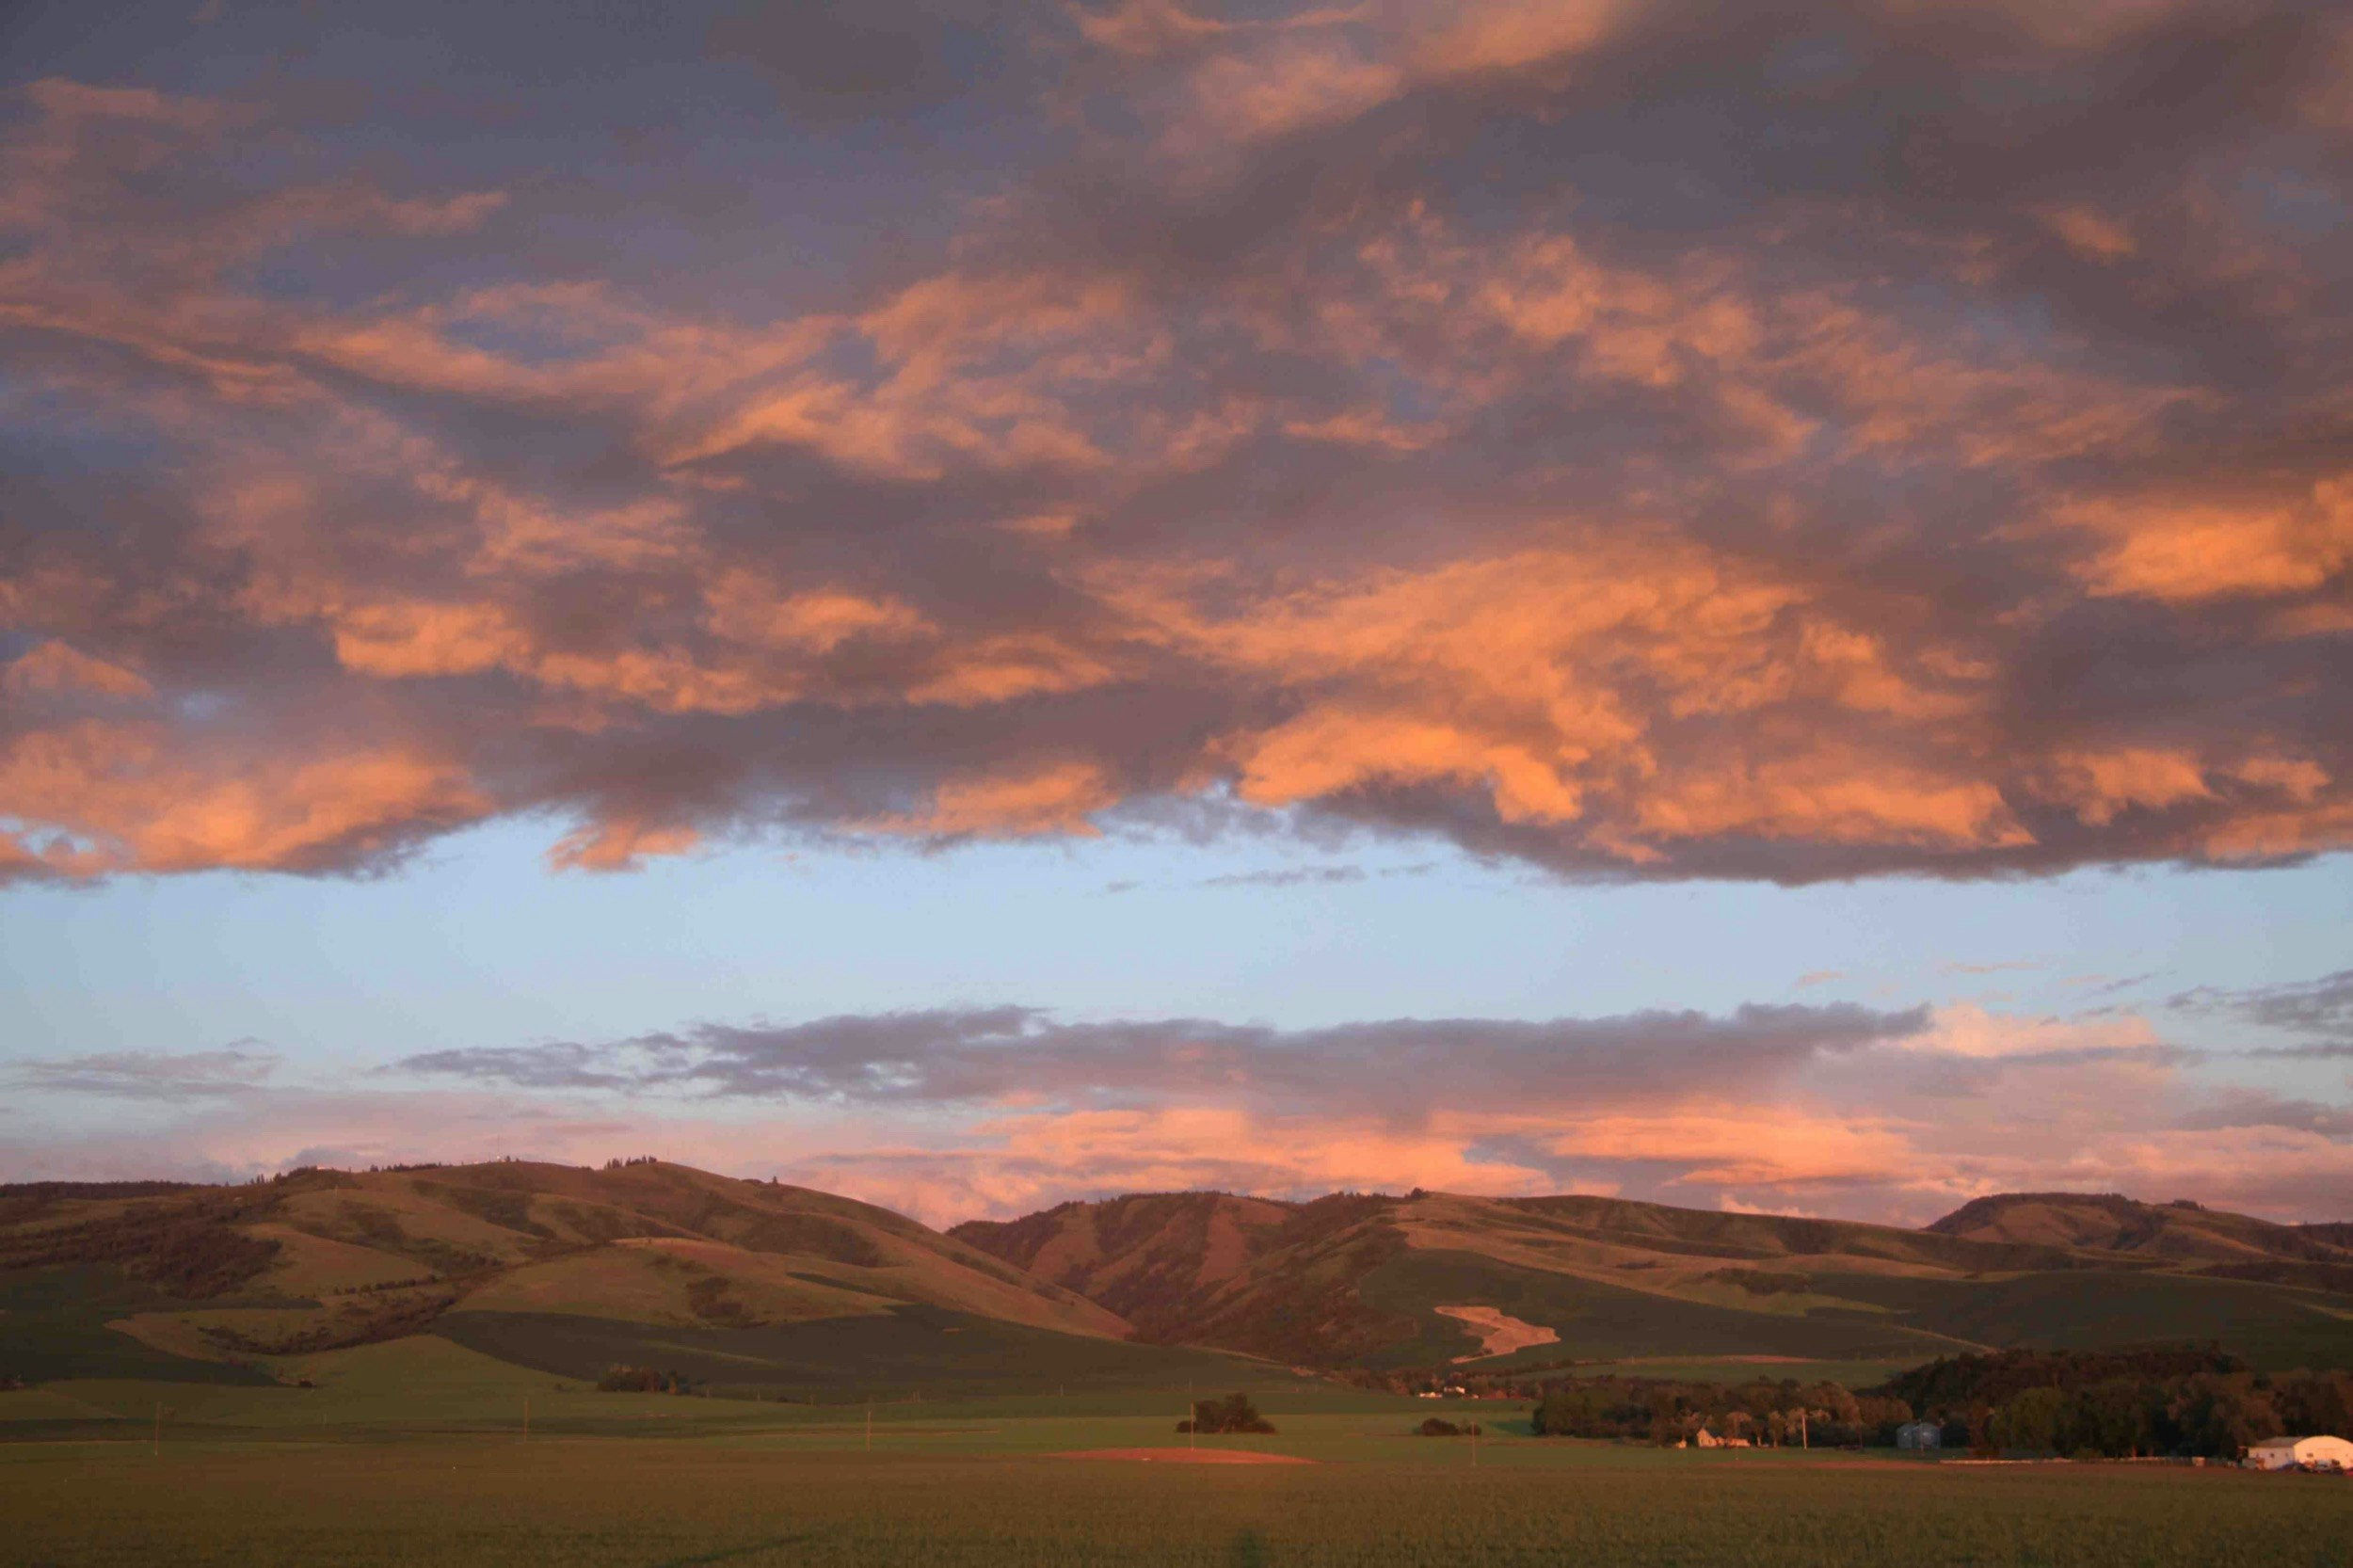 A lovely pink sunset over farmland and green rolling hills in Washington